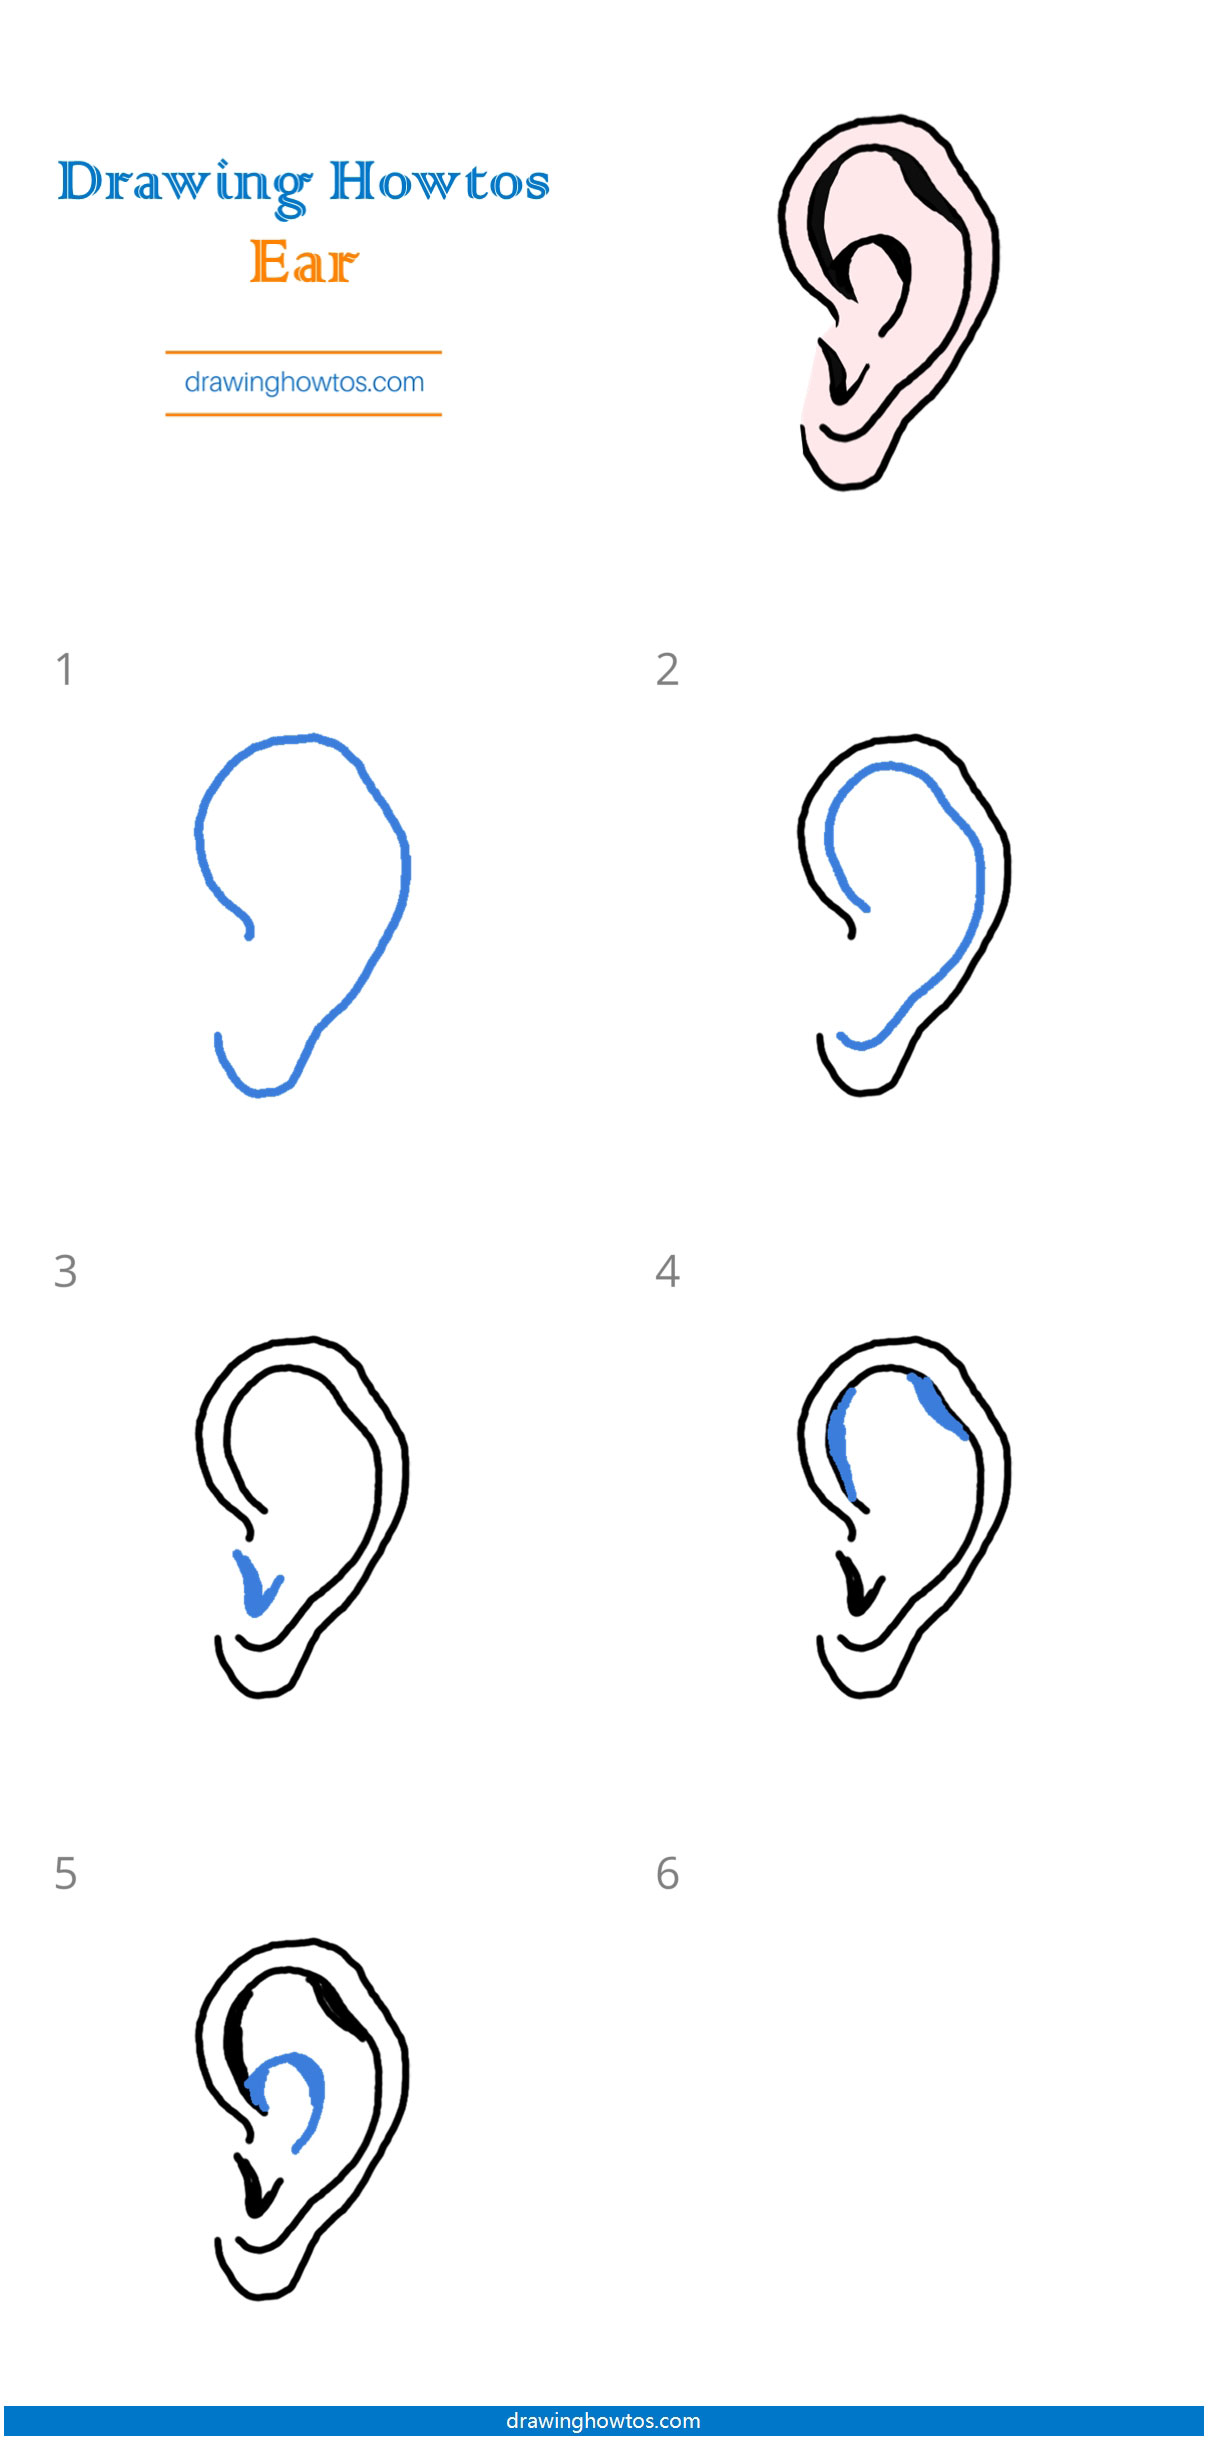 How to Draw an Ear Step by Step